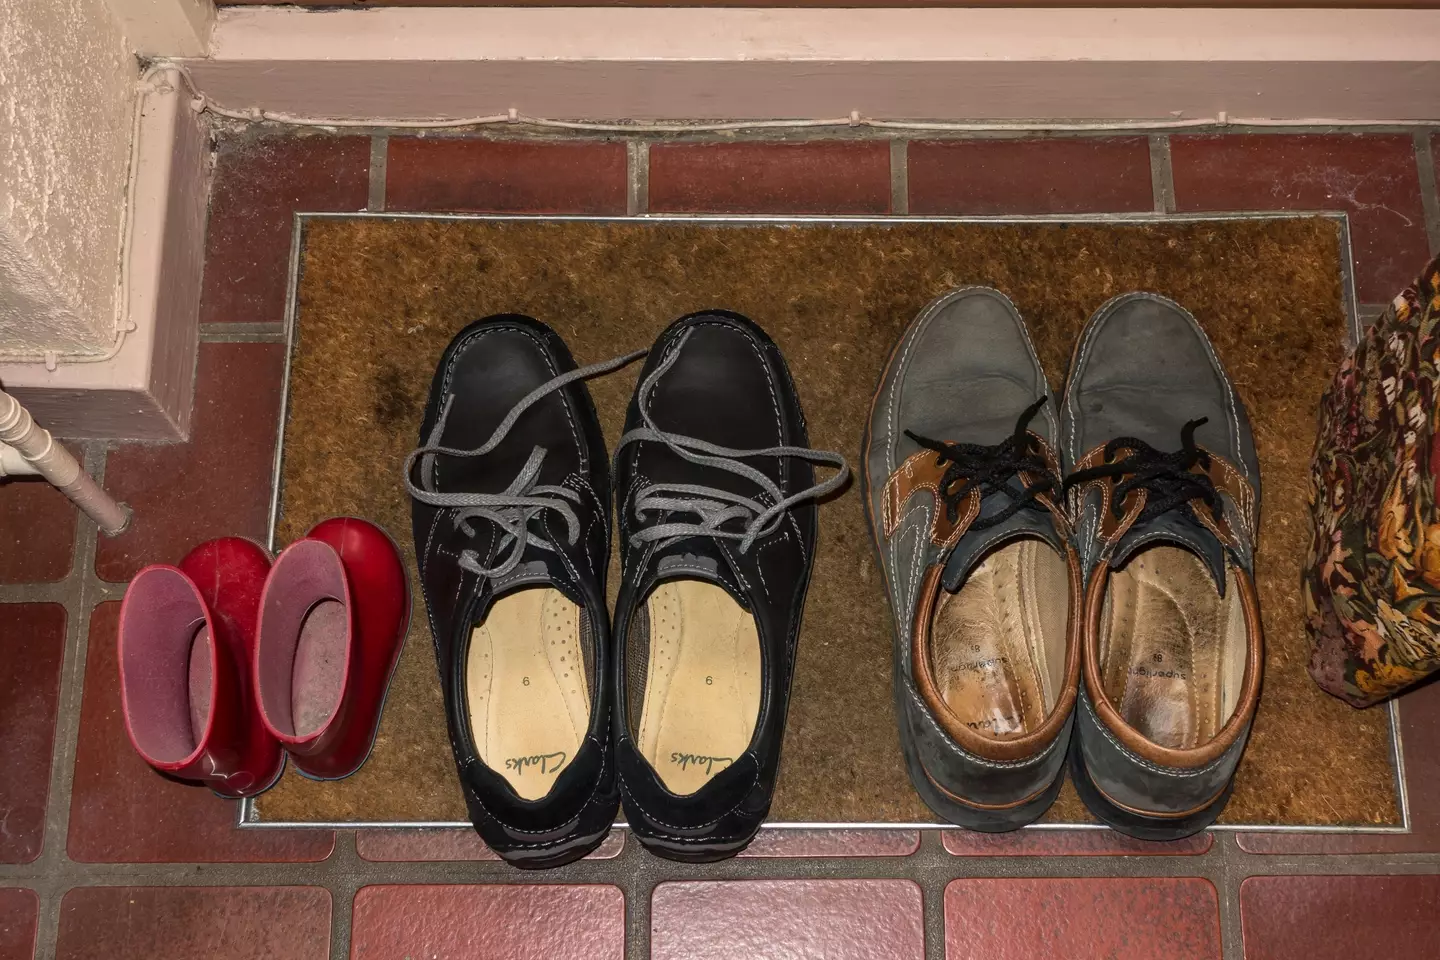 Take your shoes off when you get home to avoid tracking germs in.